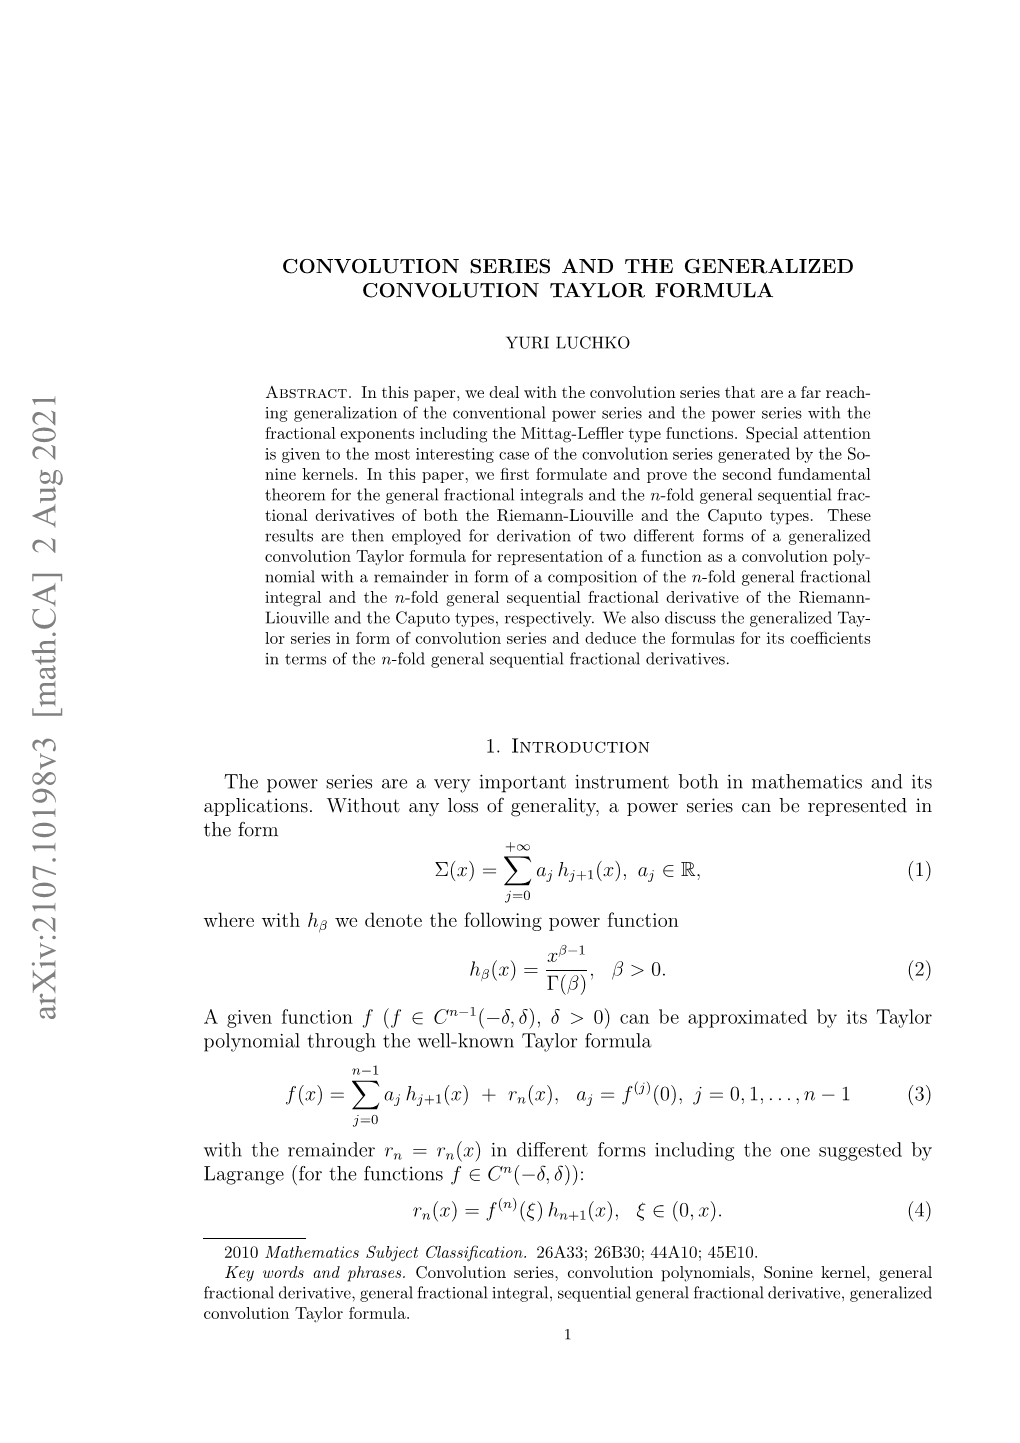 Convolution Series and the Generalized Convolution Taylor